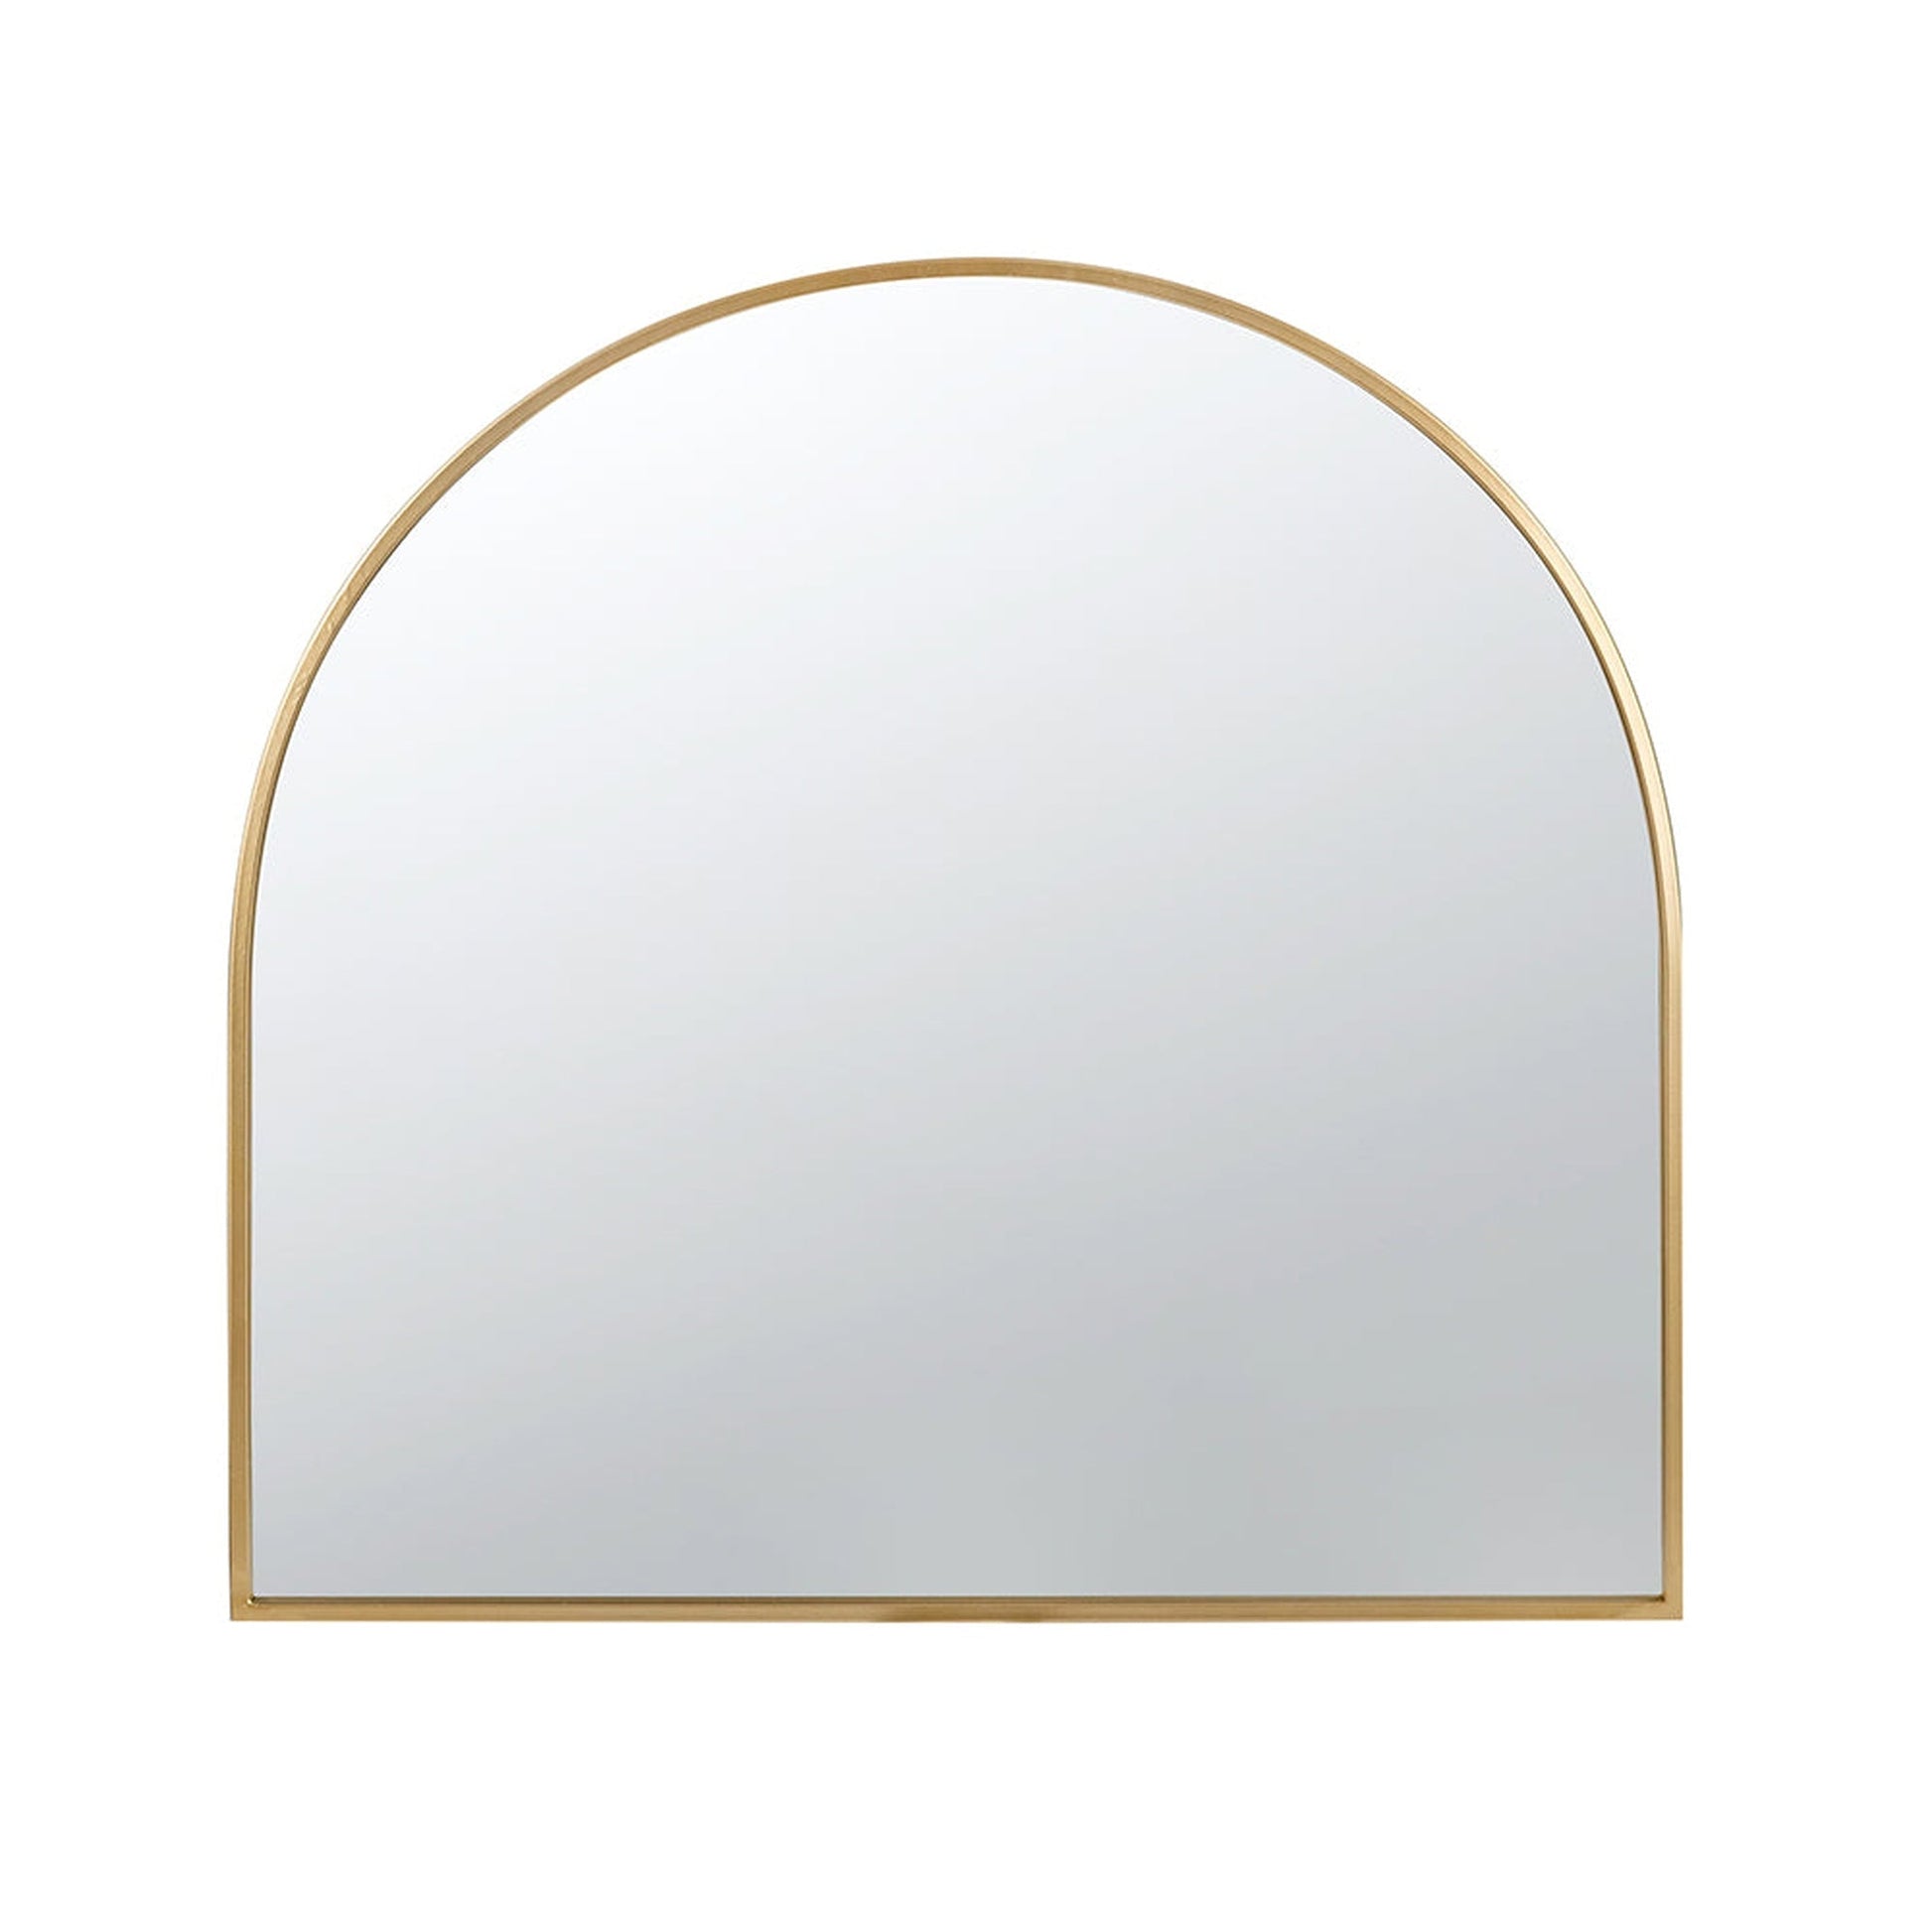 A&B Home Celine 33" x 31" Bundle of 12 Arched Shaped Gold Metal Frame Wall-Mounted Mirror